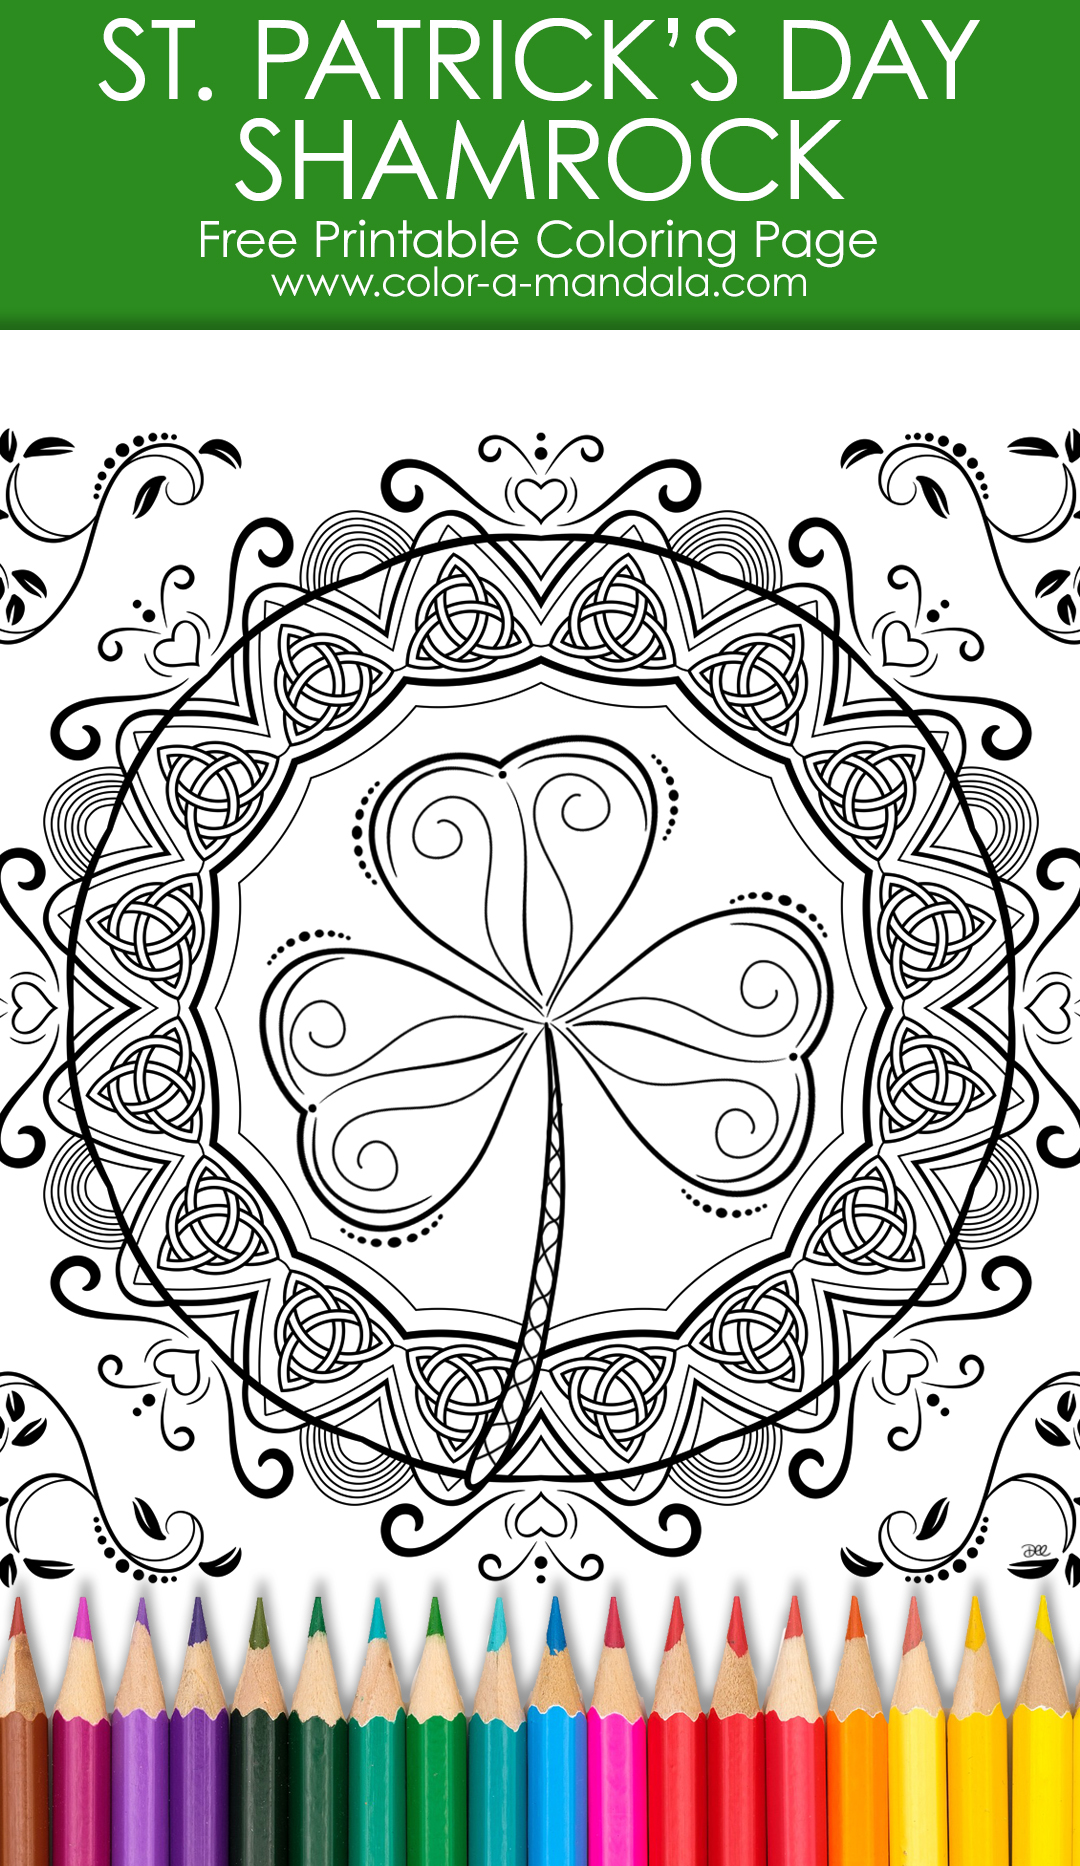 St Patrick's Day Shamrock coloring page image